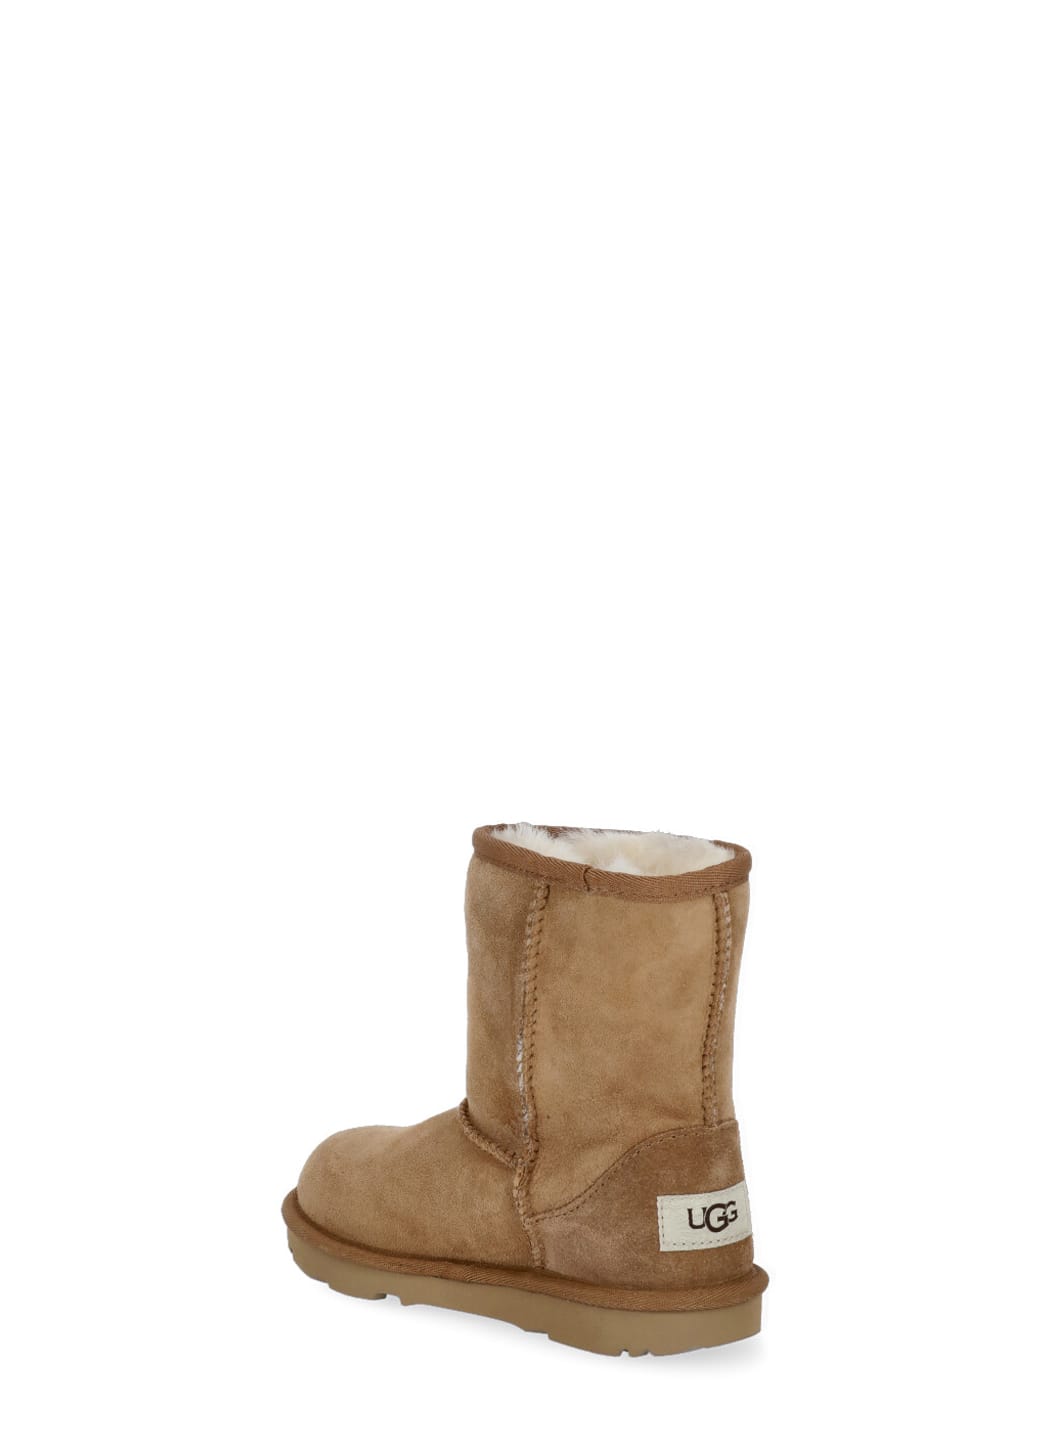 Shop Ugg Classic Ii Boots In Che